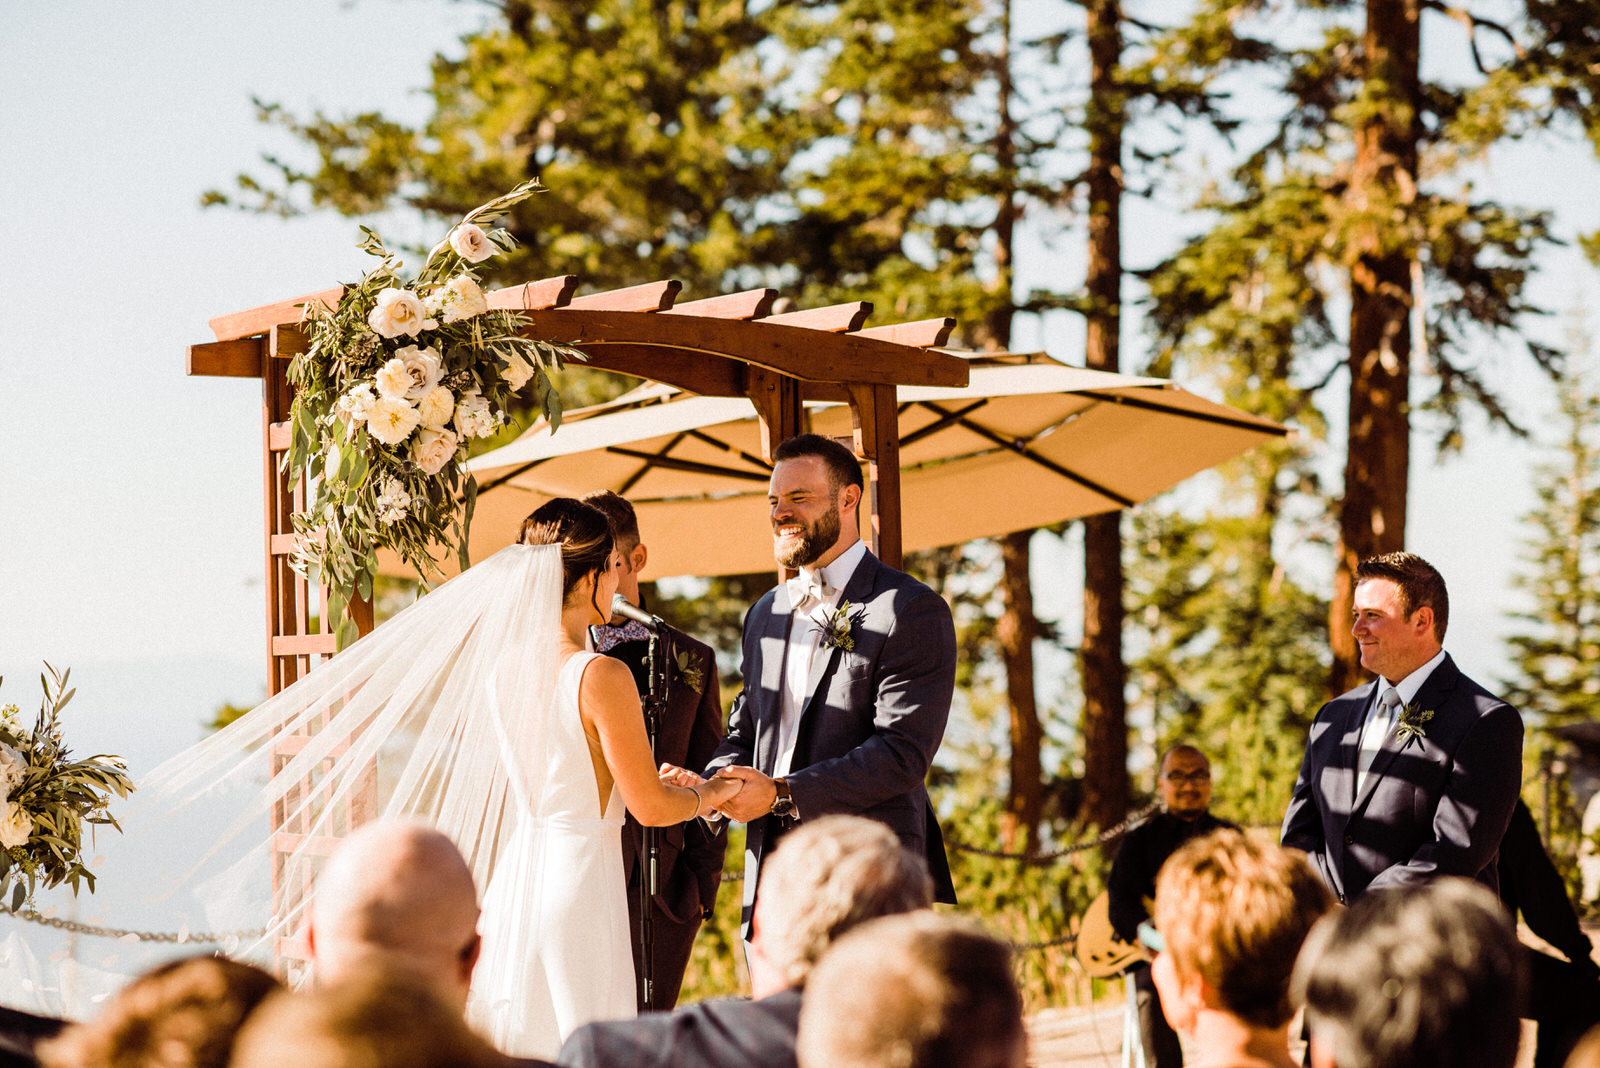 Bride and groom exchange rings at Heavenly Lakeview Lodge August Wedding Ceremony